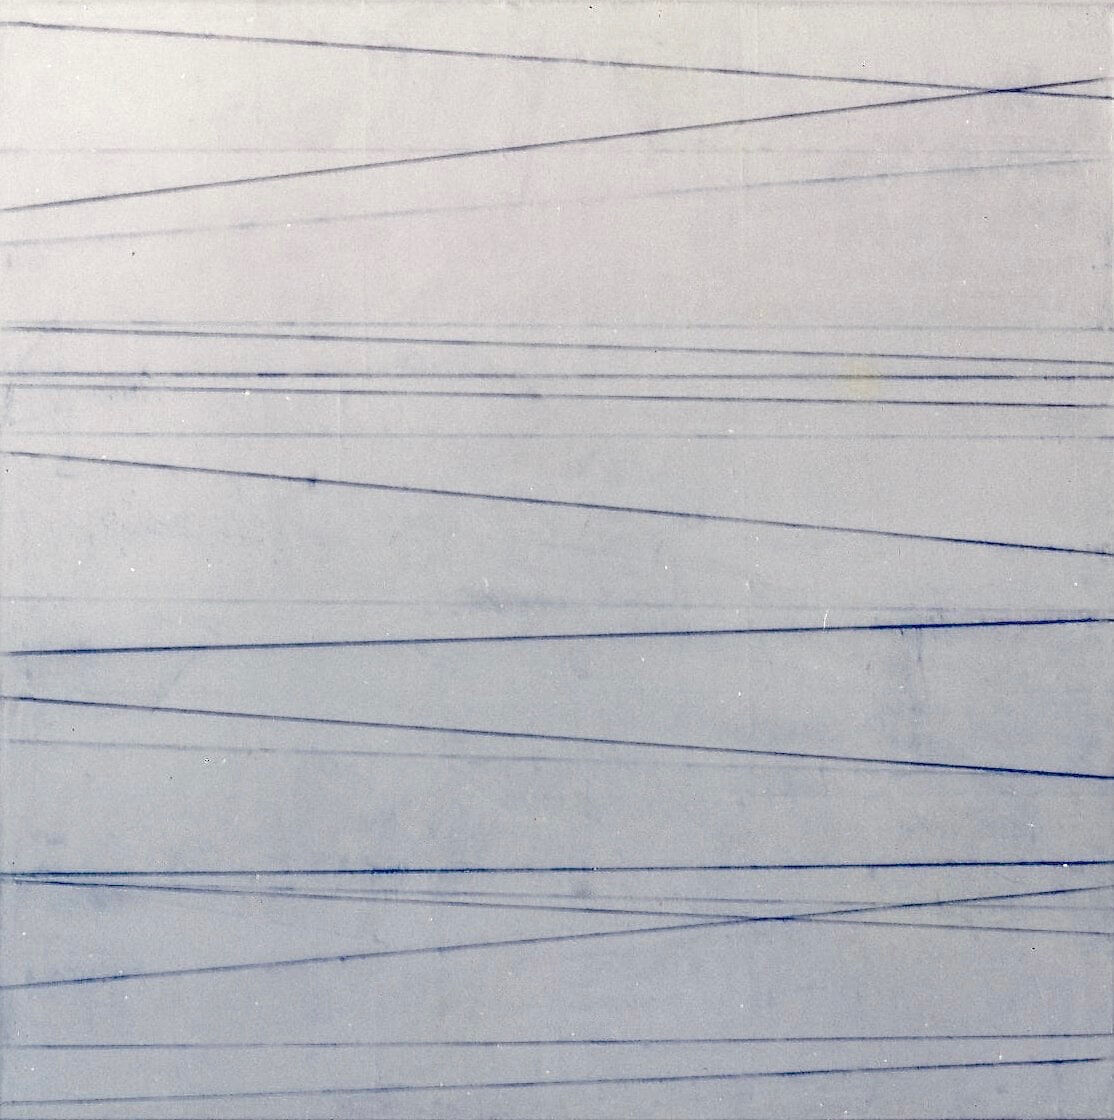 Untitled (Blue lines) #1